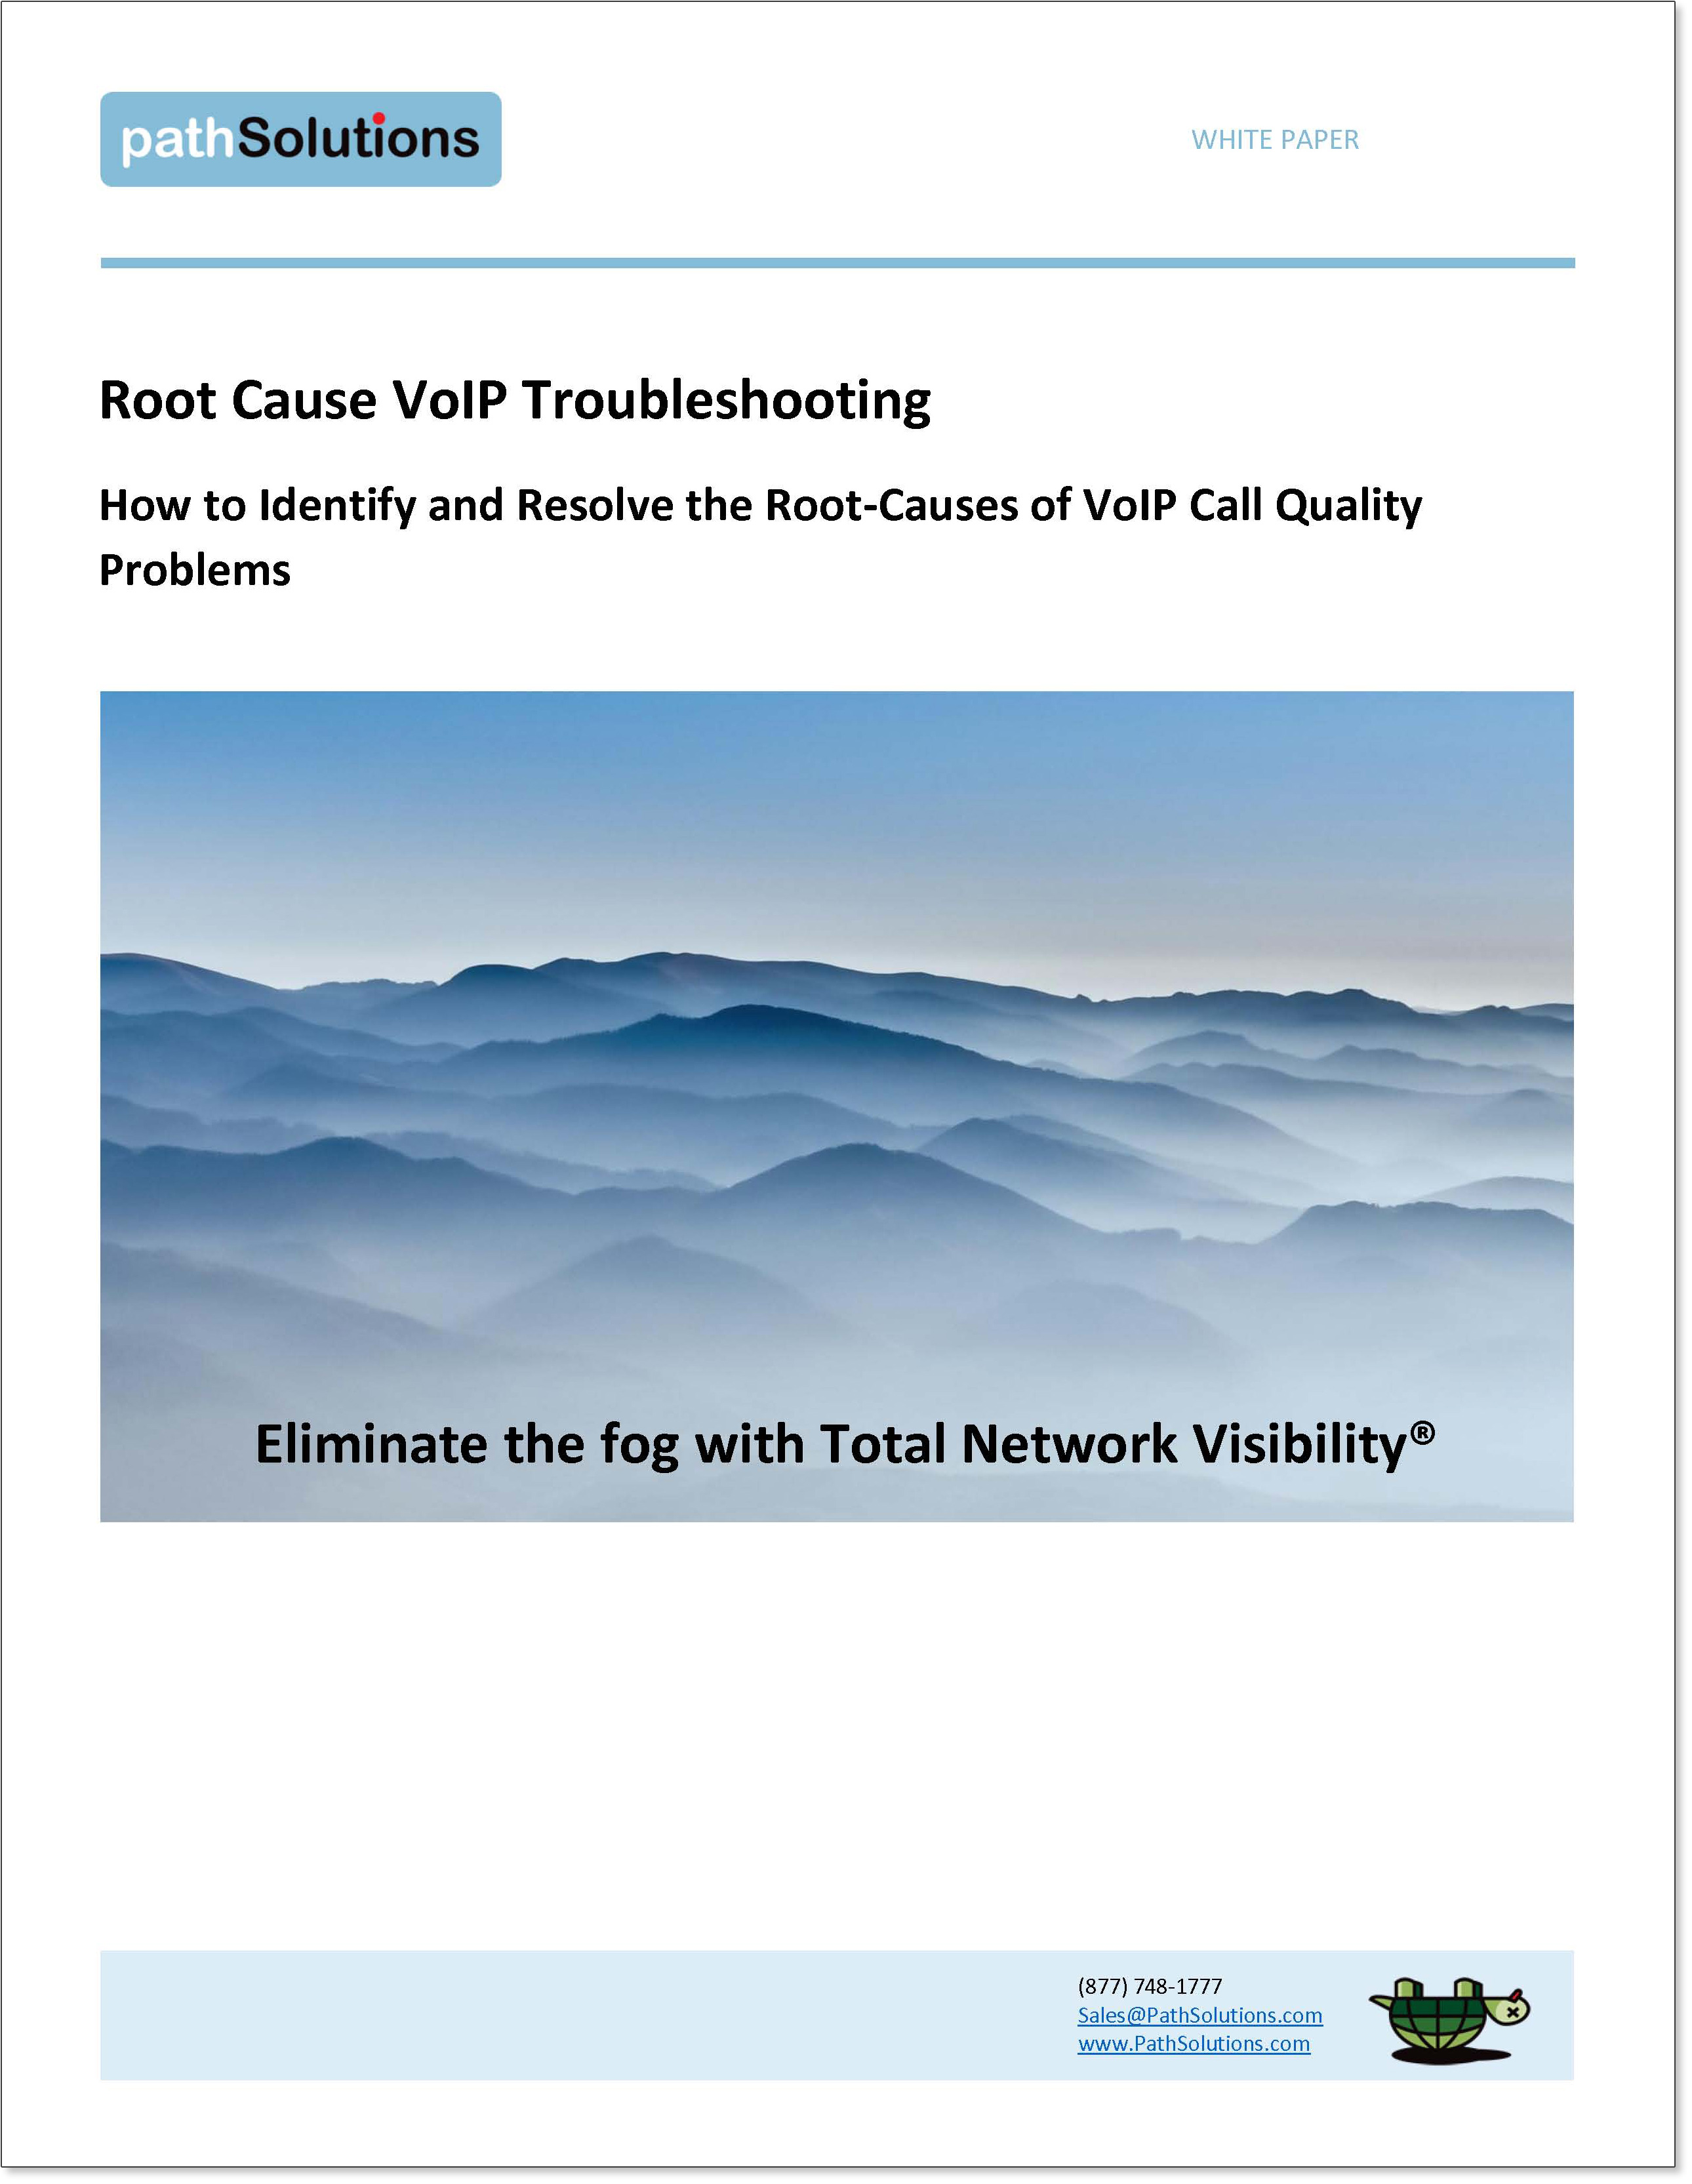 whitepaper-root-cause-voip-page_01_a